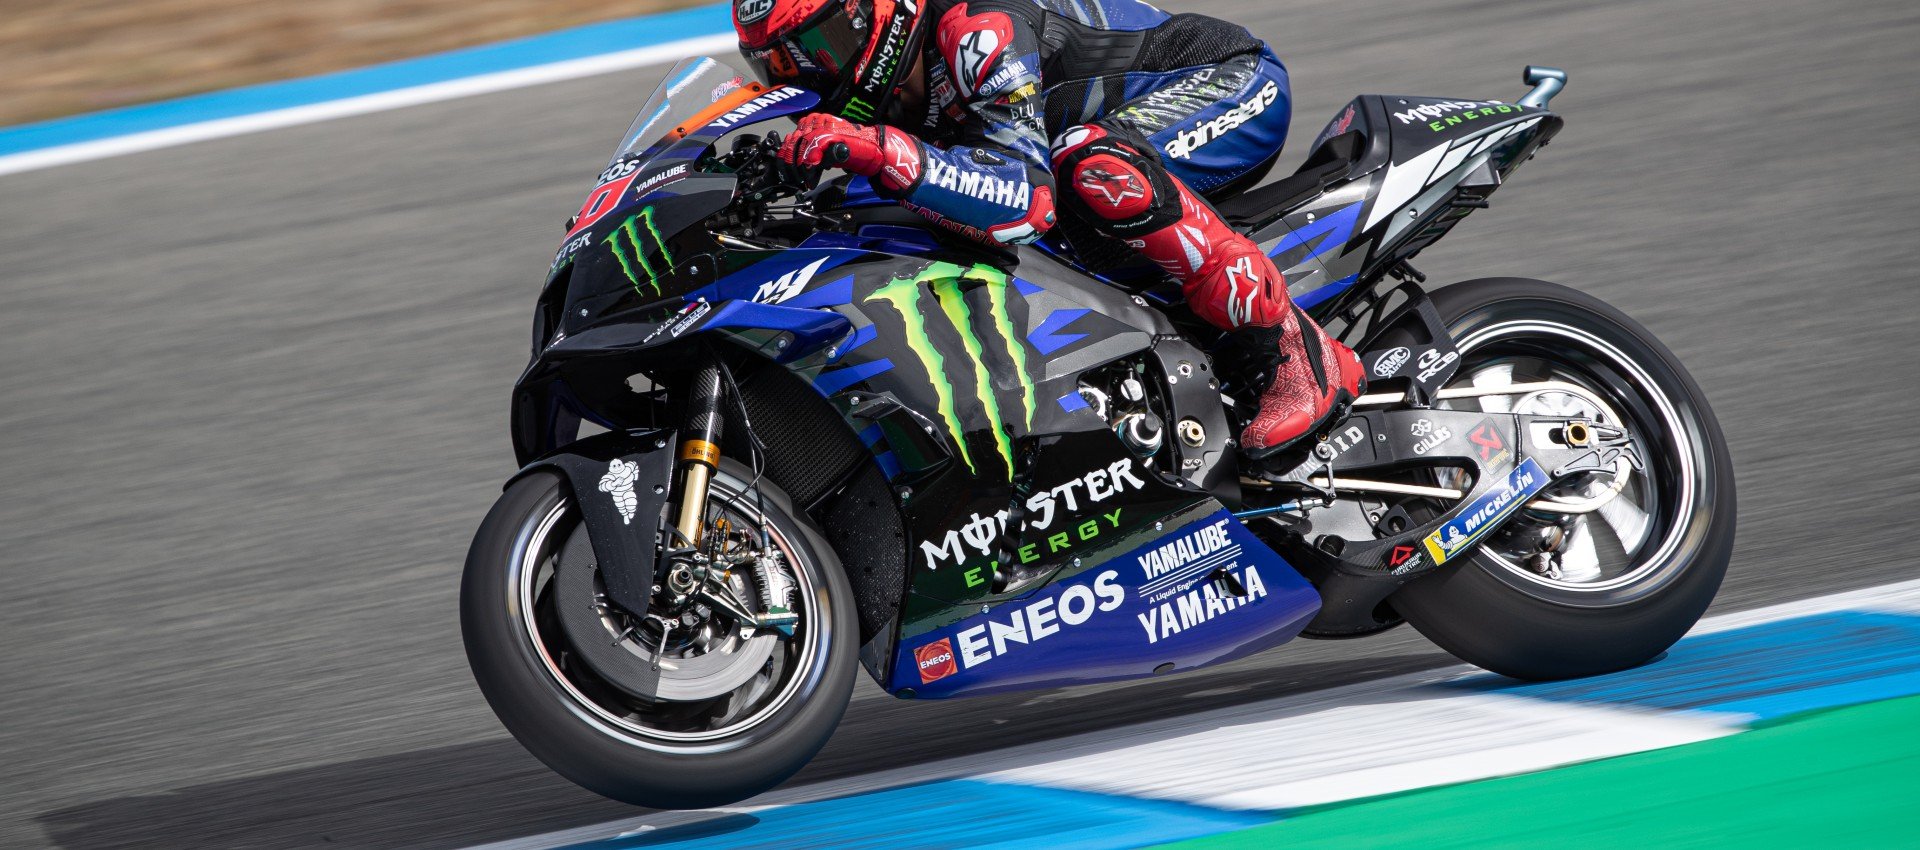 BMC Air Filter is sponsor and official supplier of the Monster Energy Yamaha MotoGP team